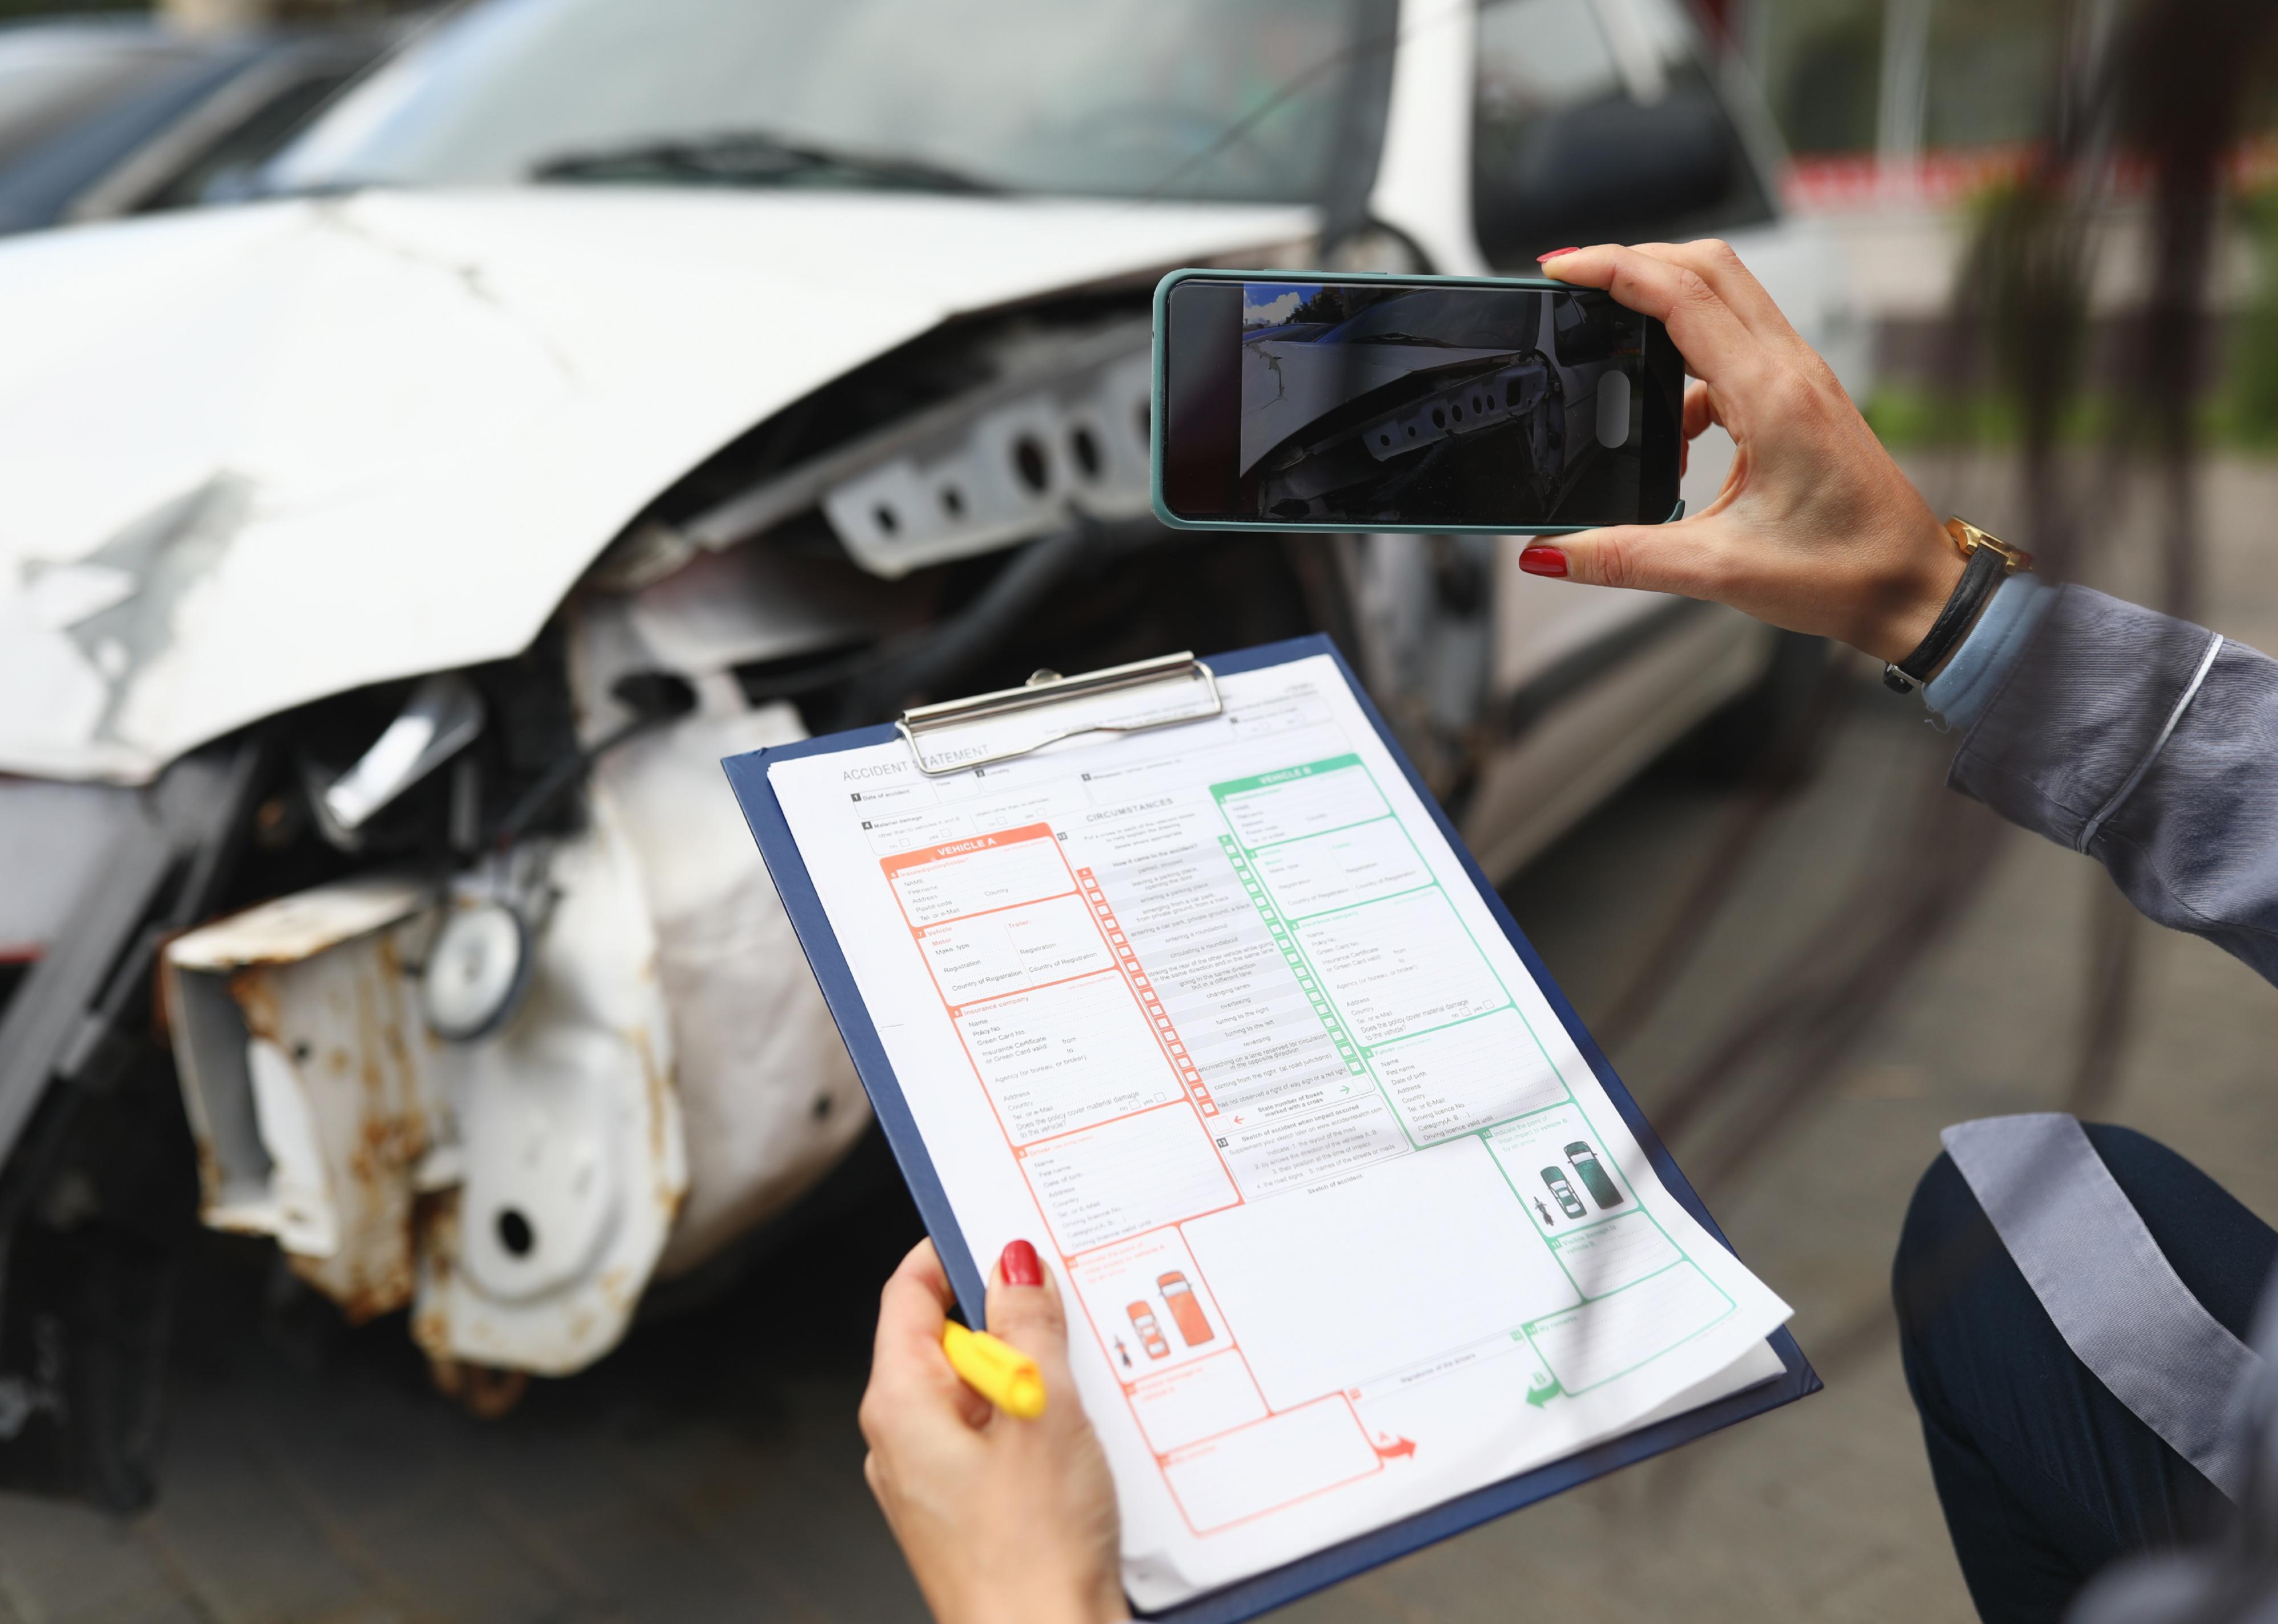 Woman photographs a broken car on smartphone and holds insurance documents in her hands